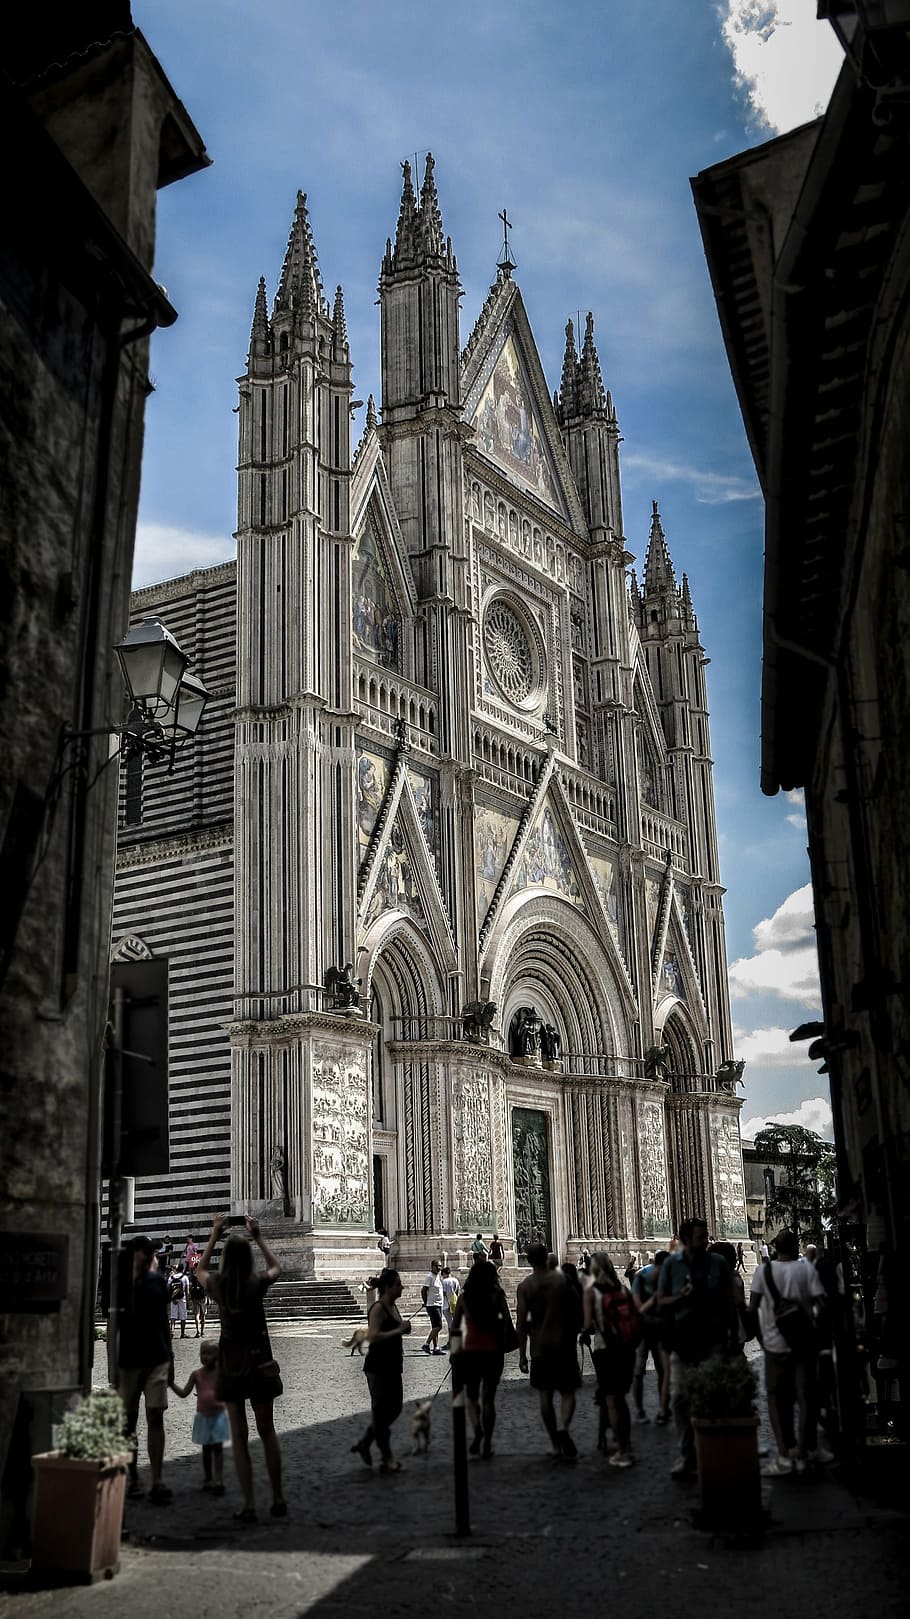 dom, italy, space, city, tourist attraction, holiday, holidays, church, architecture, built structure